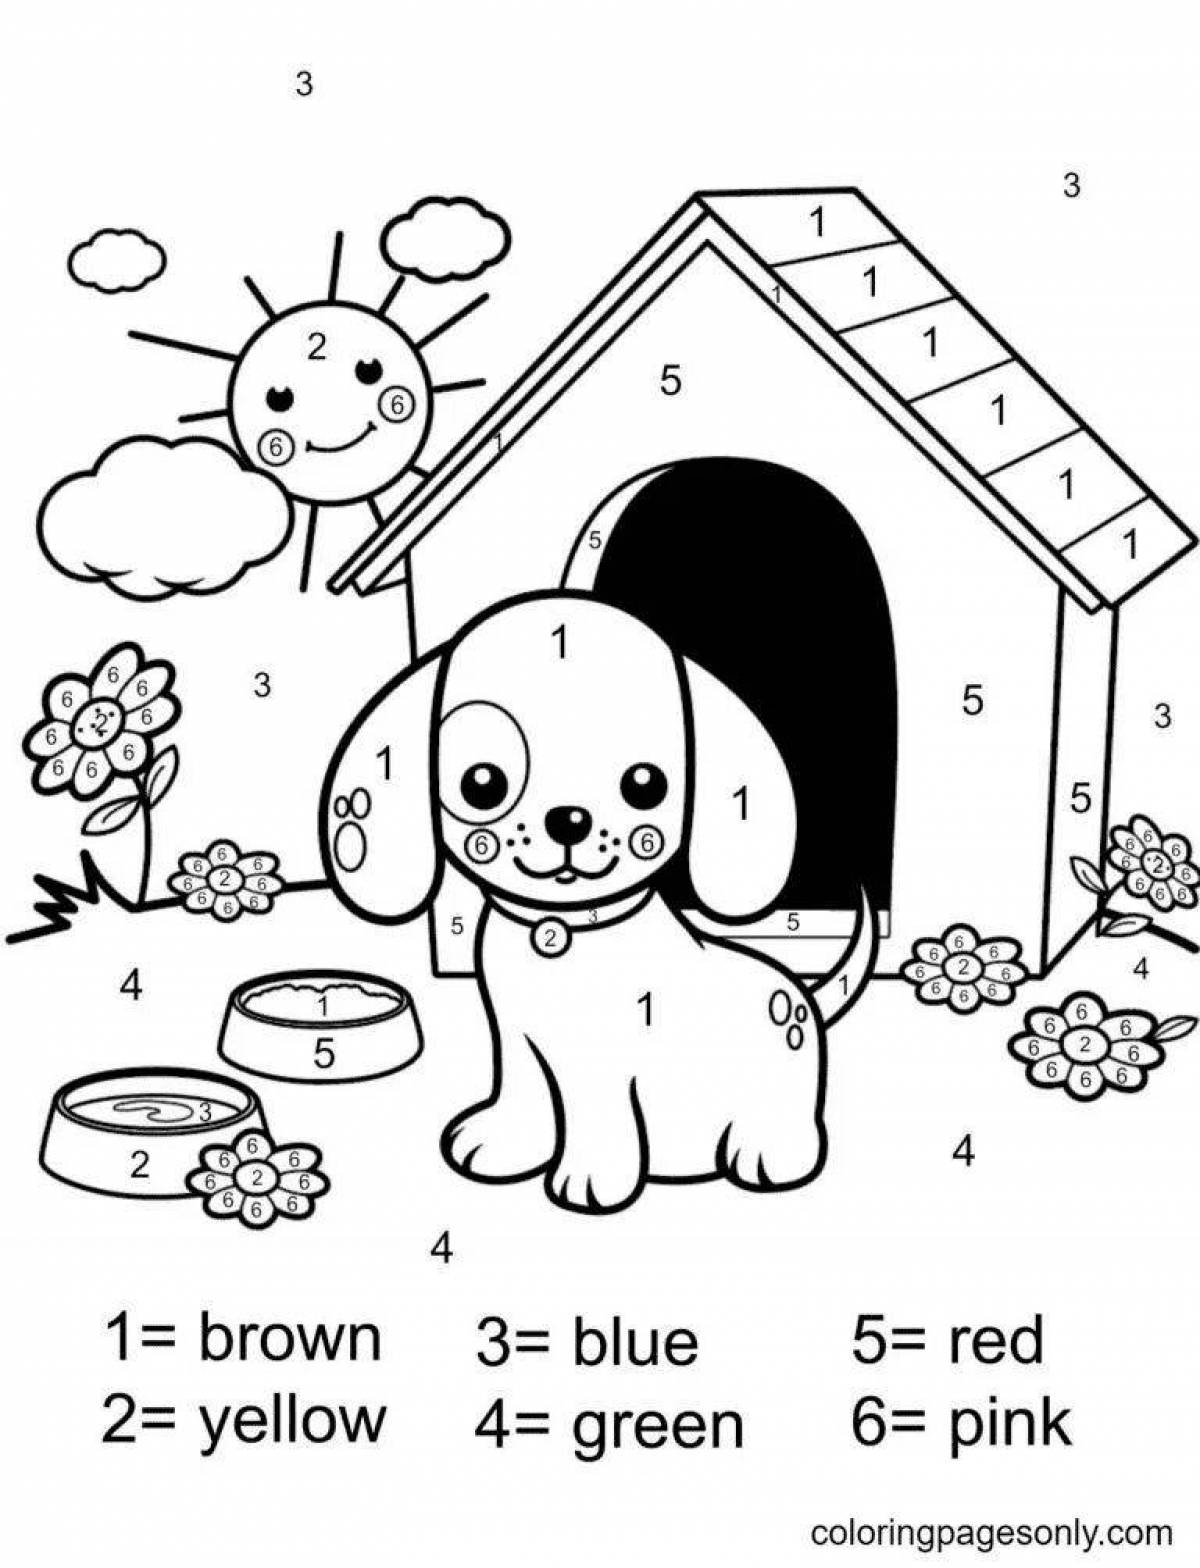 Creative dog coloring by numbers